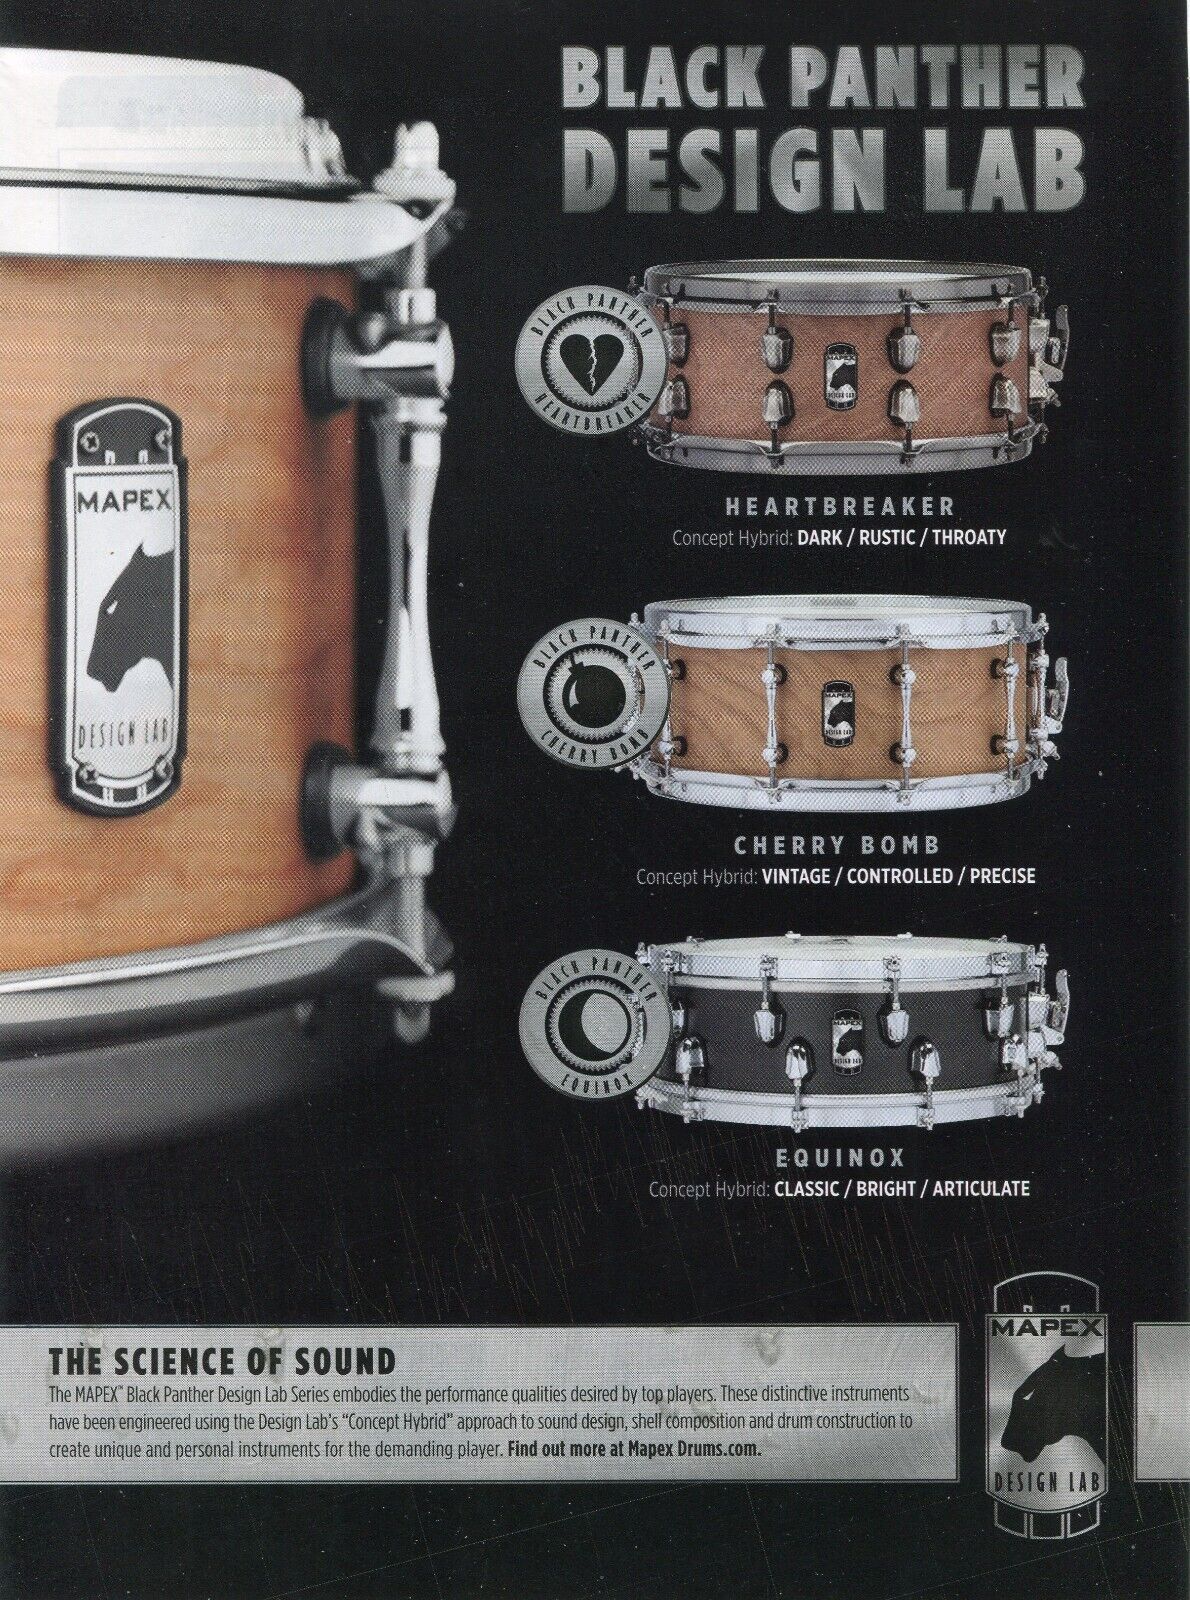 2017 Print Ad of Mapex Black Panther Design Lab Snare Drums Heartbreaker Equinox